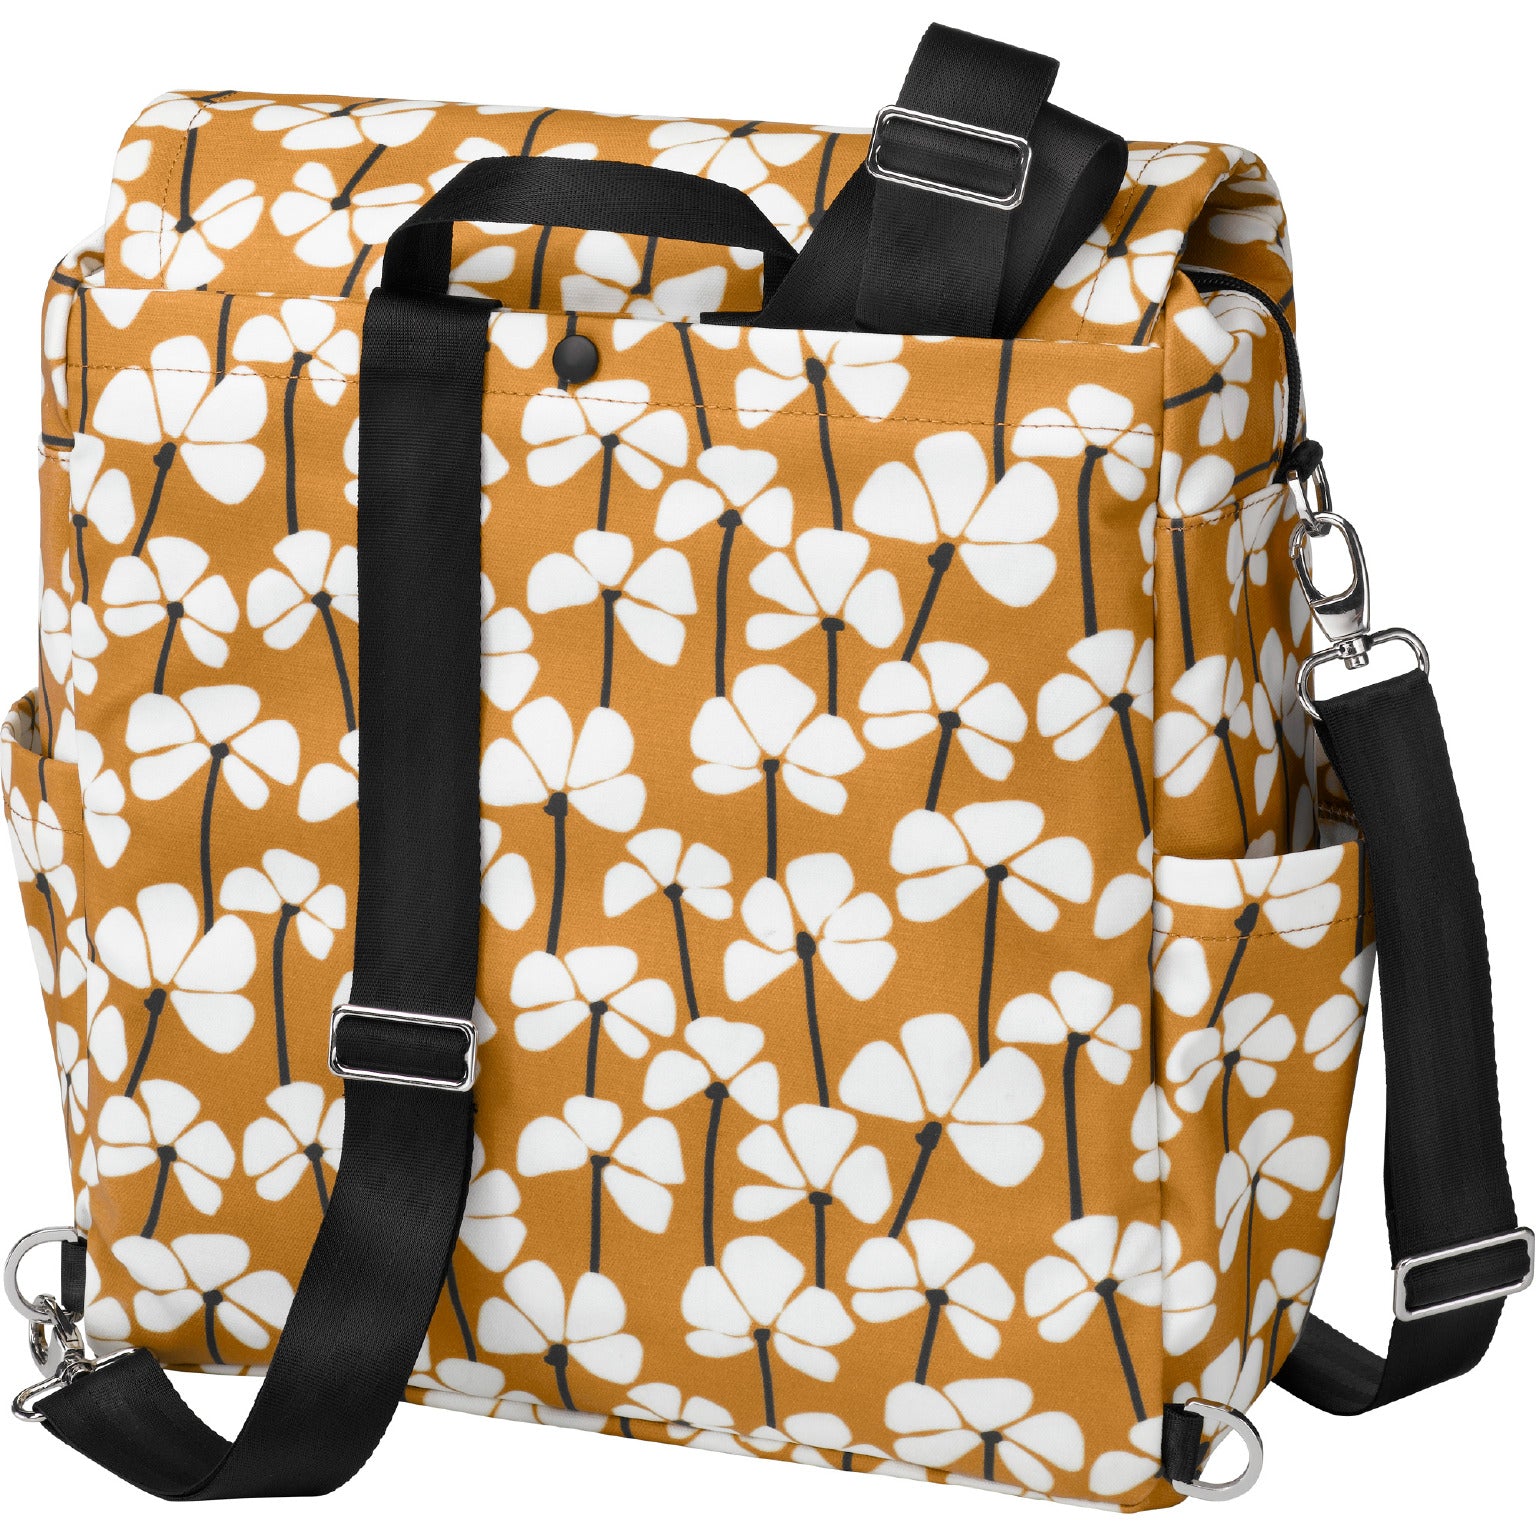 Petunia Pickle Bottom Boxy Backpack - Meandering In Middleton